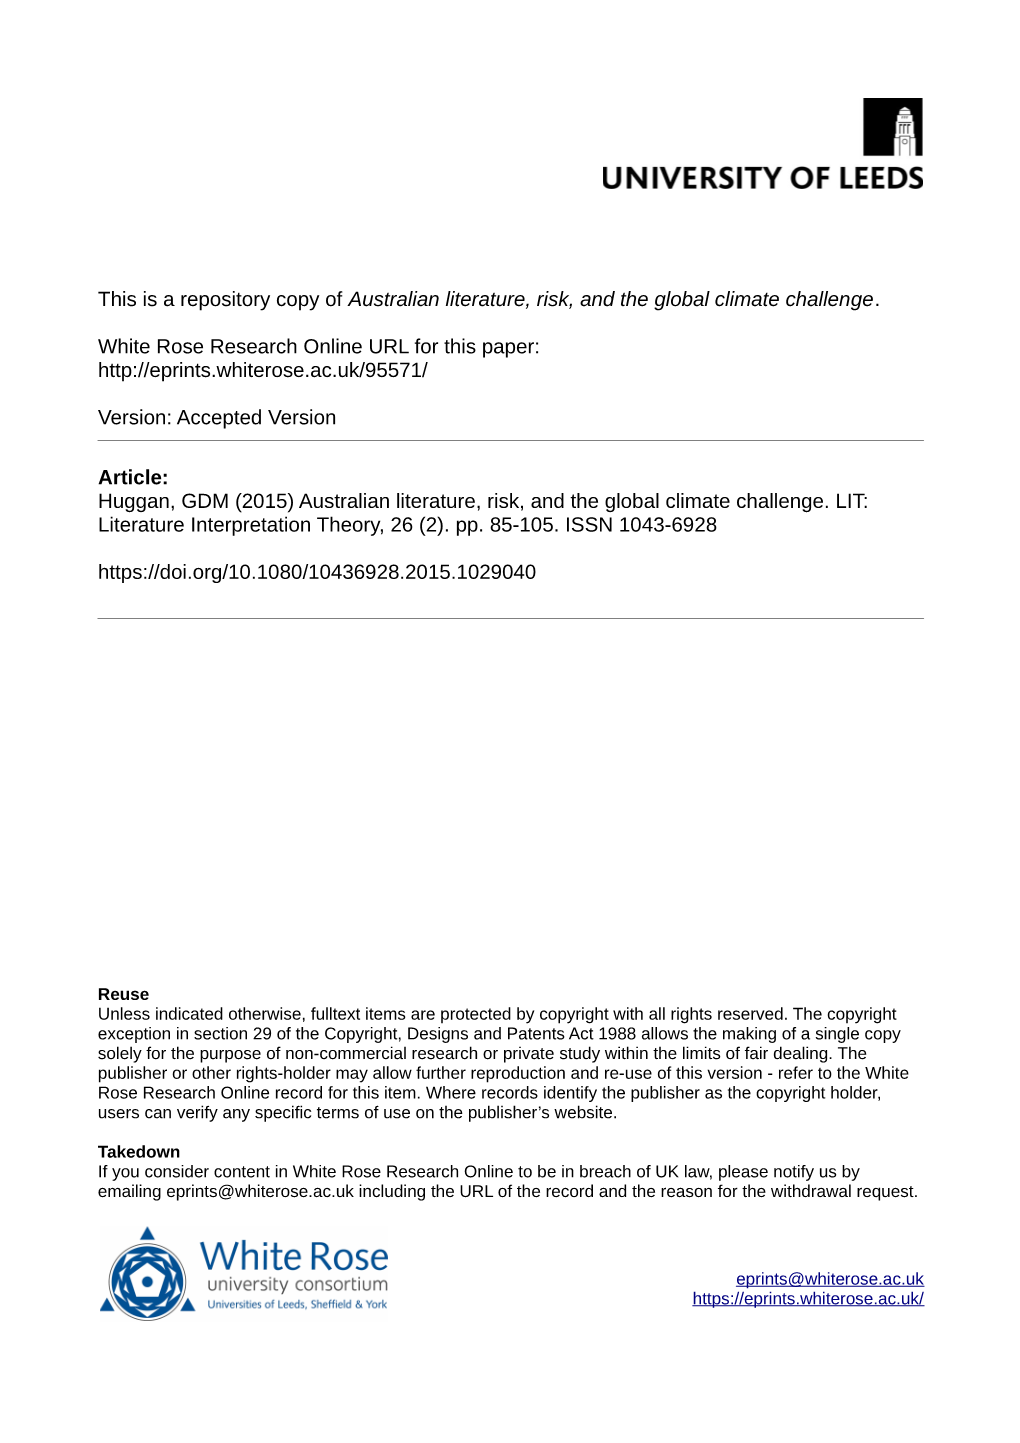 Australian Literature, Risk, and the Global Climate Challenge